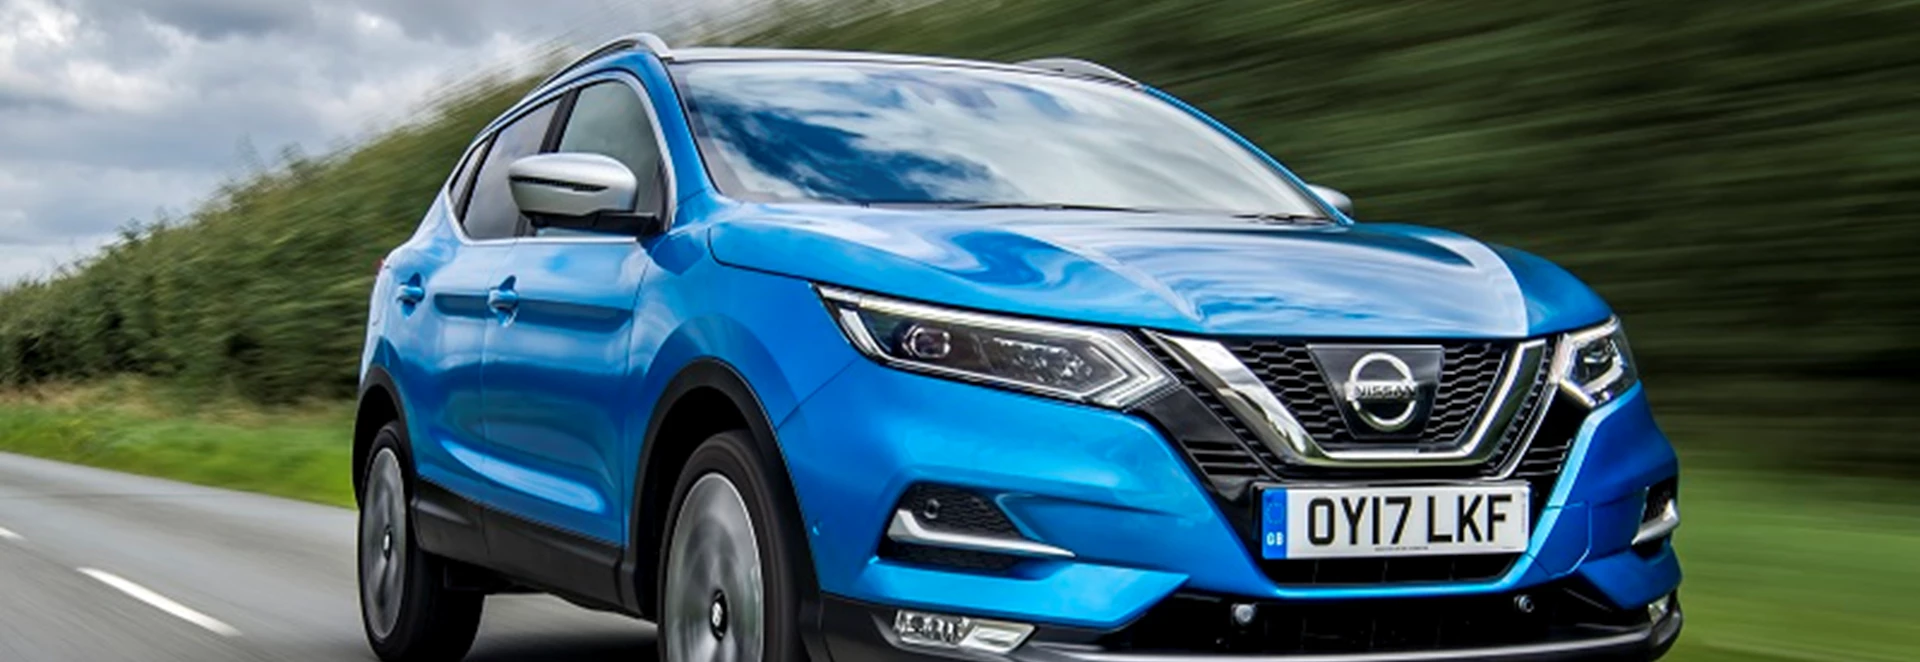 A buyer’s guide to the Nissan Qashqai 